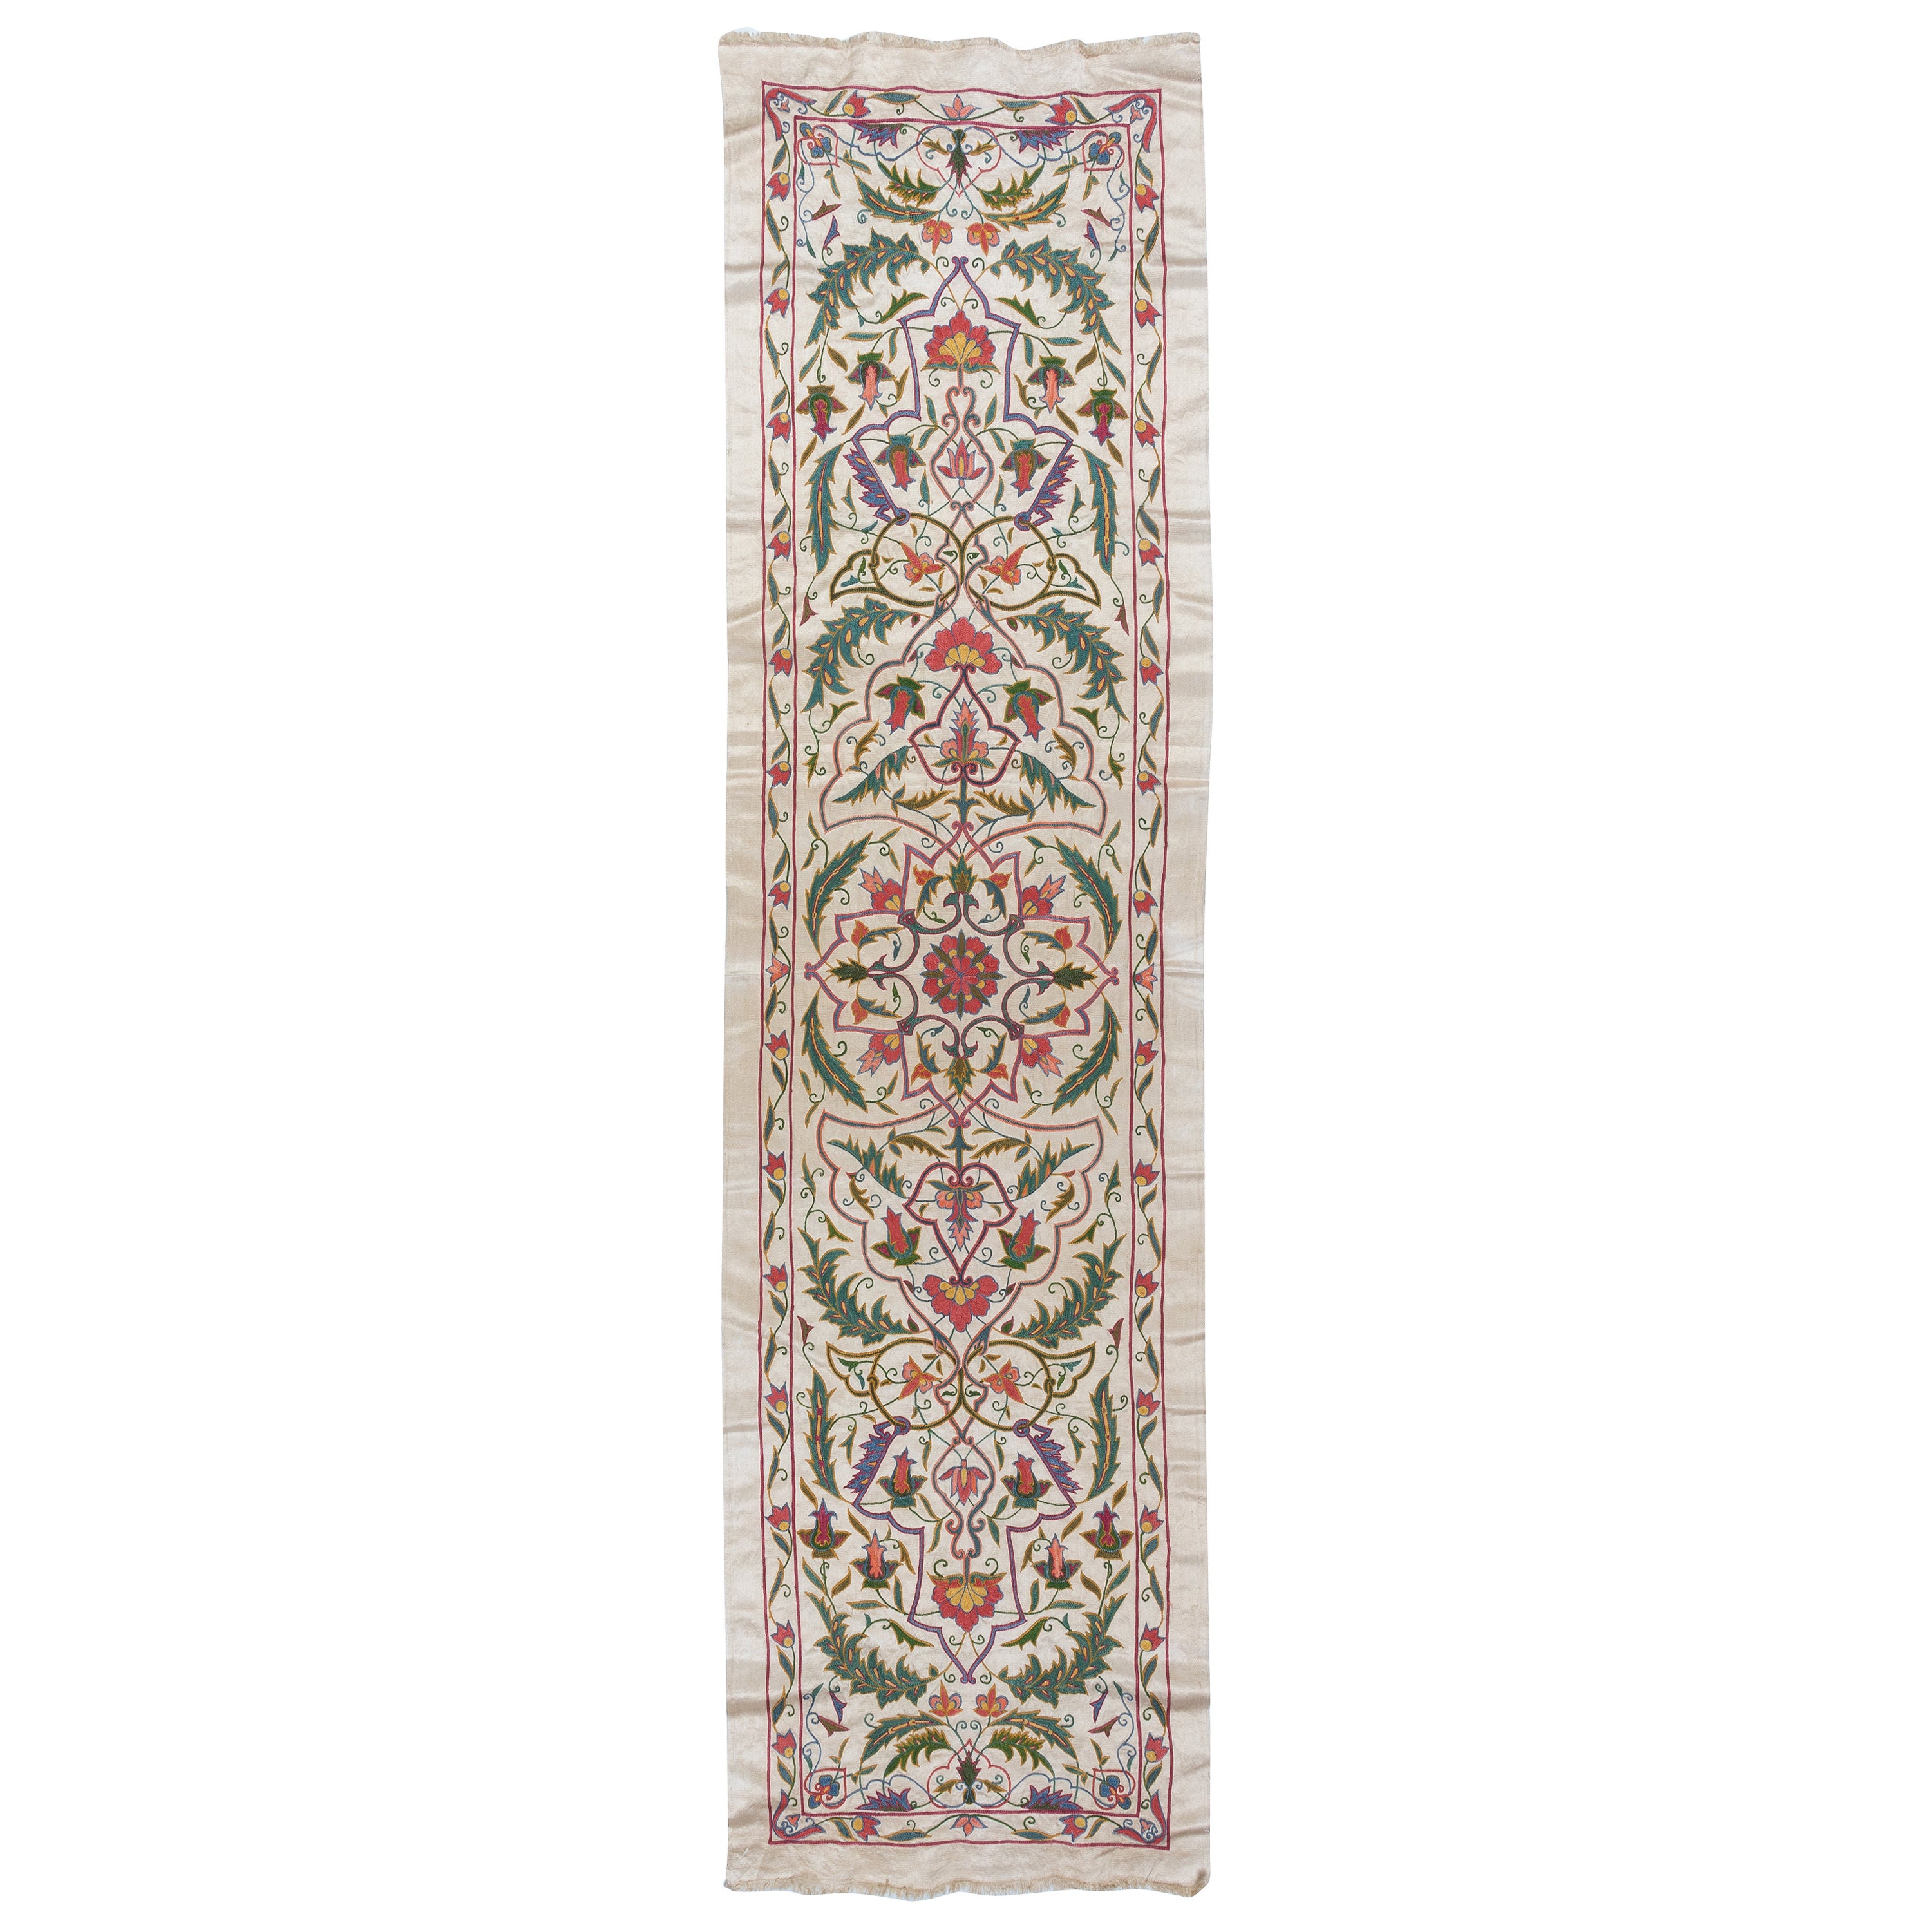 1.7x6.4 ft Embroidered All Silk Runner, Suzani Wall Hanging, Uzbek Bedspread